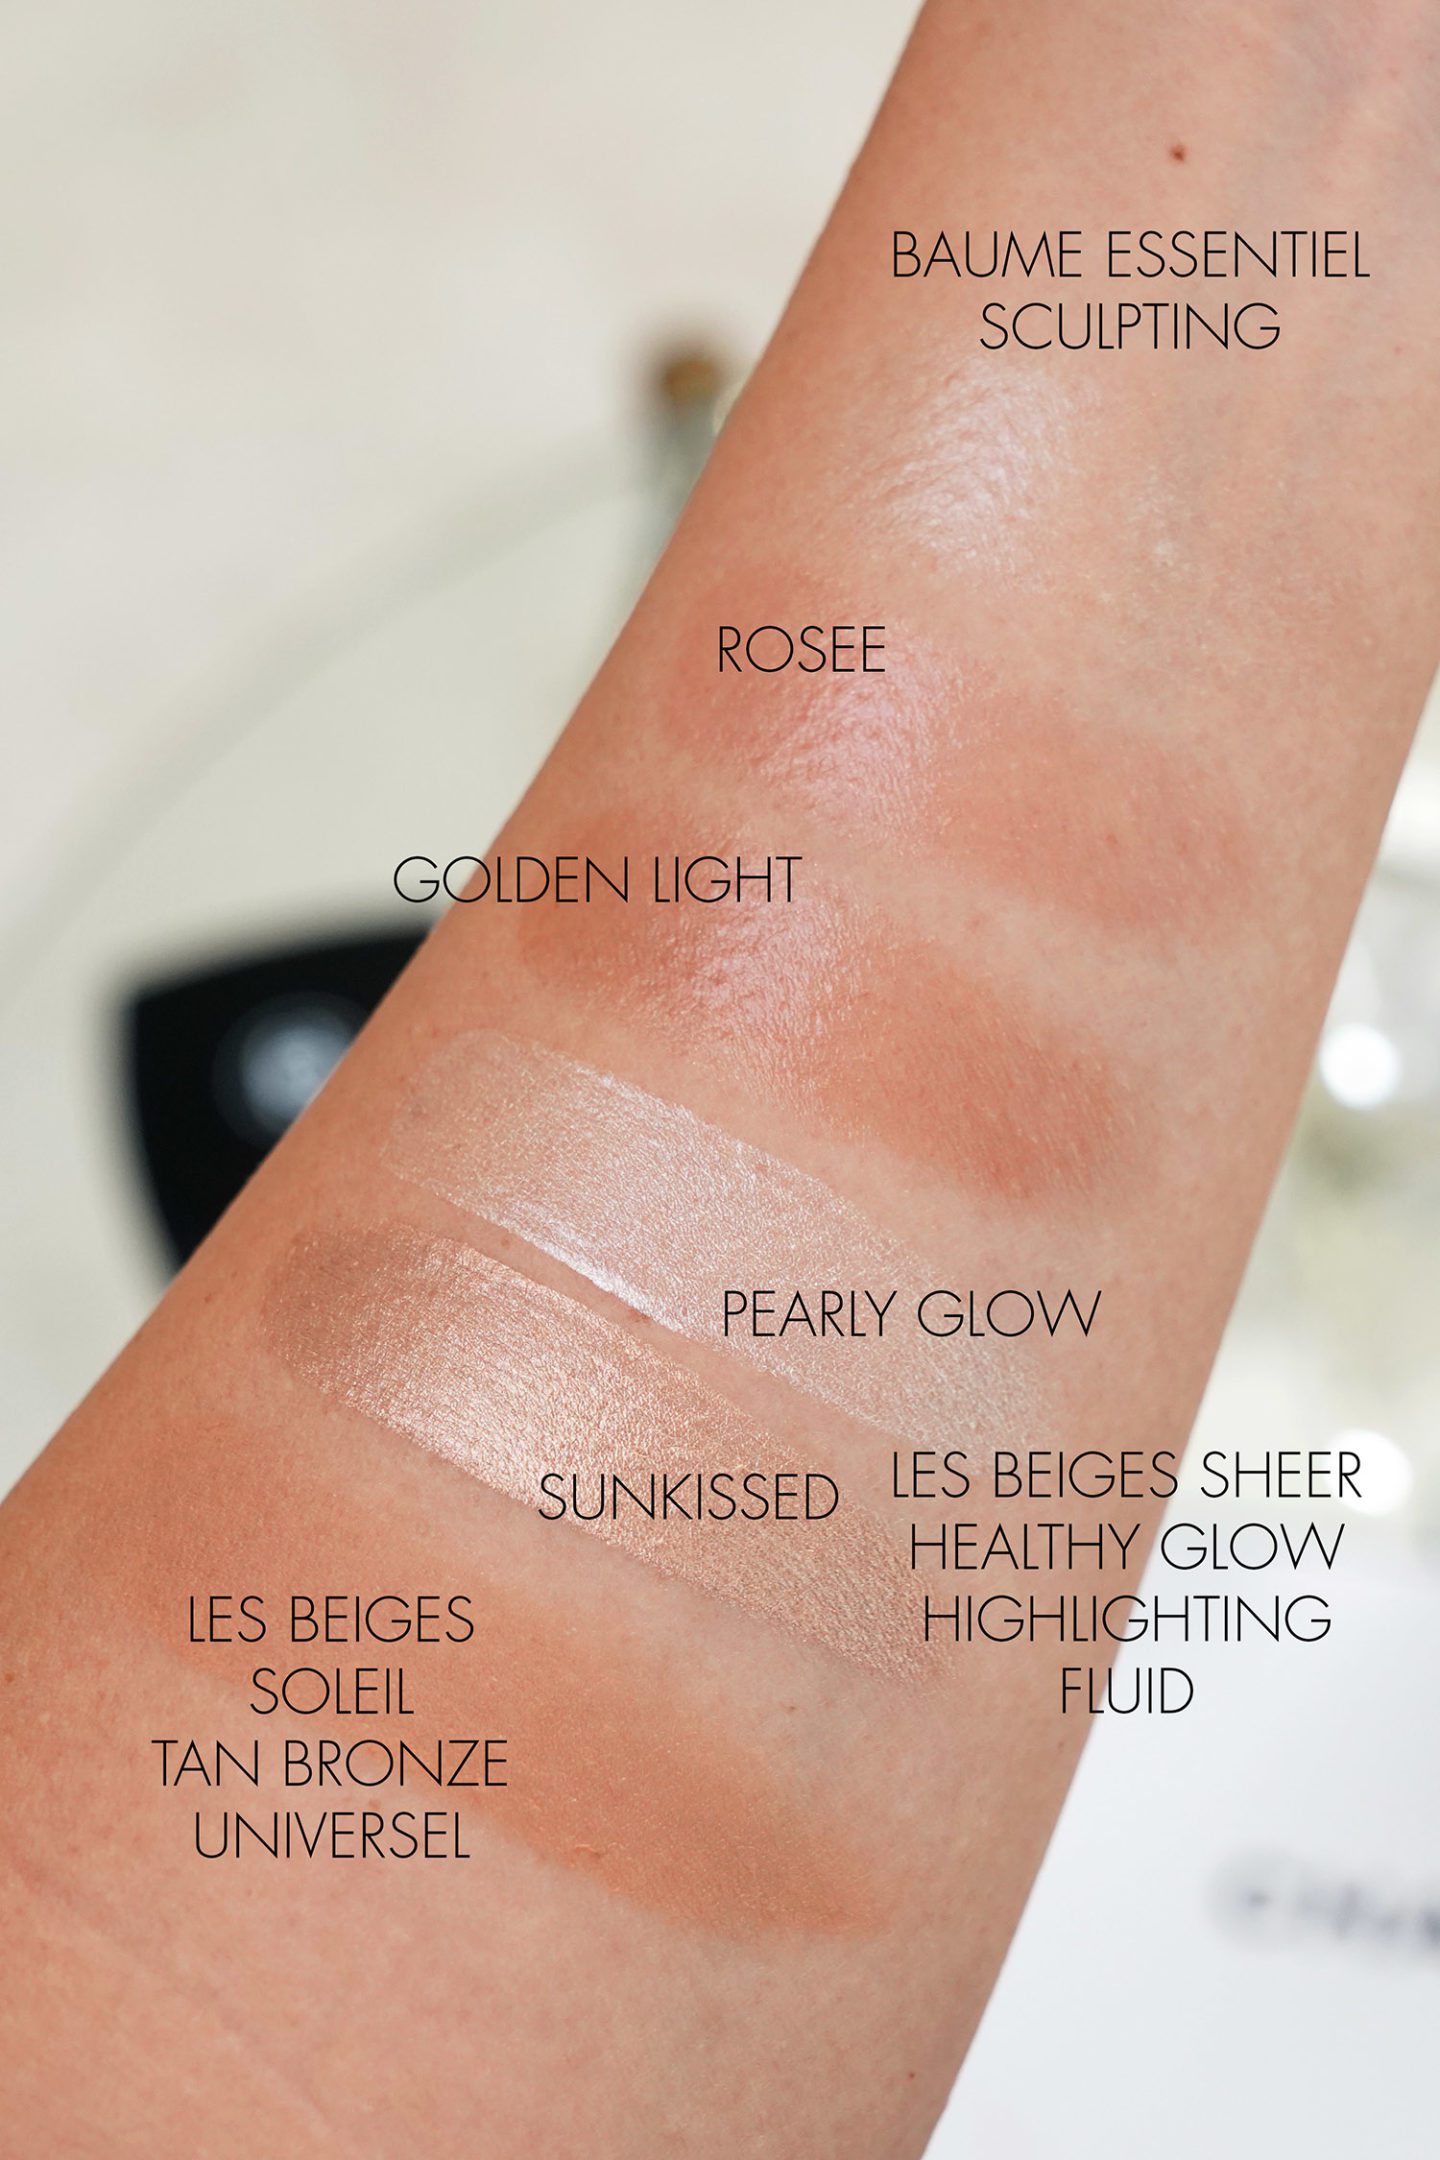 Chanel Makeup swatches